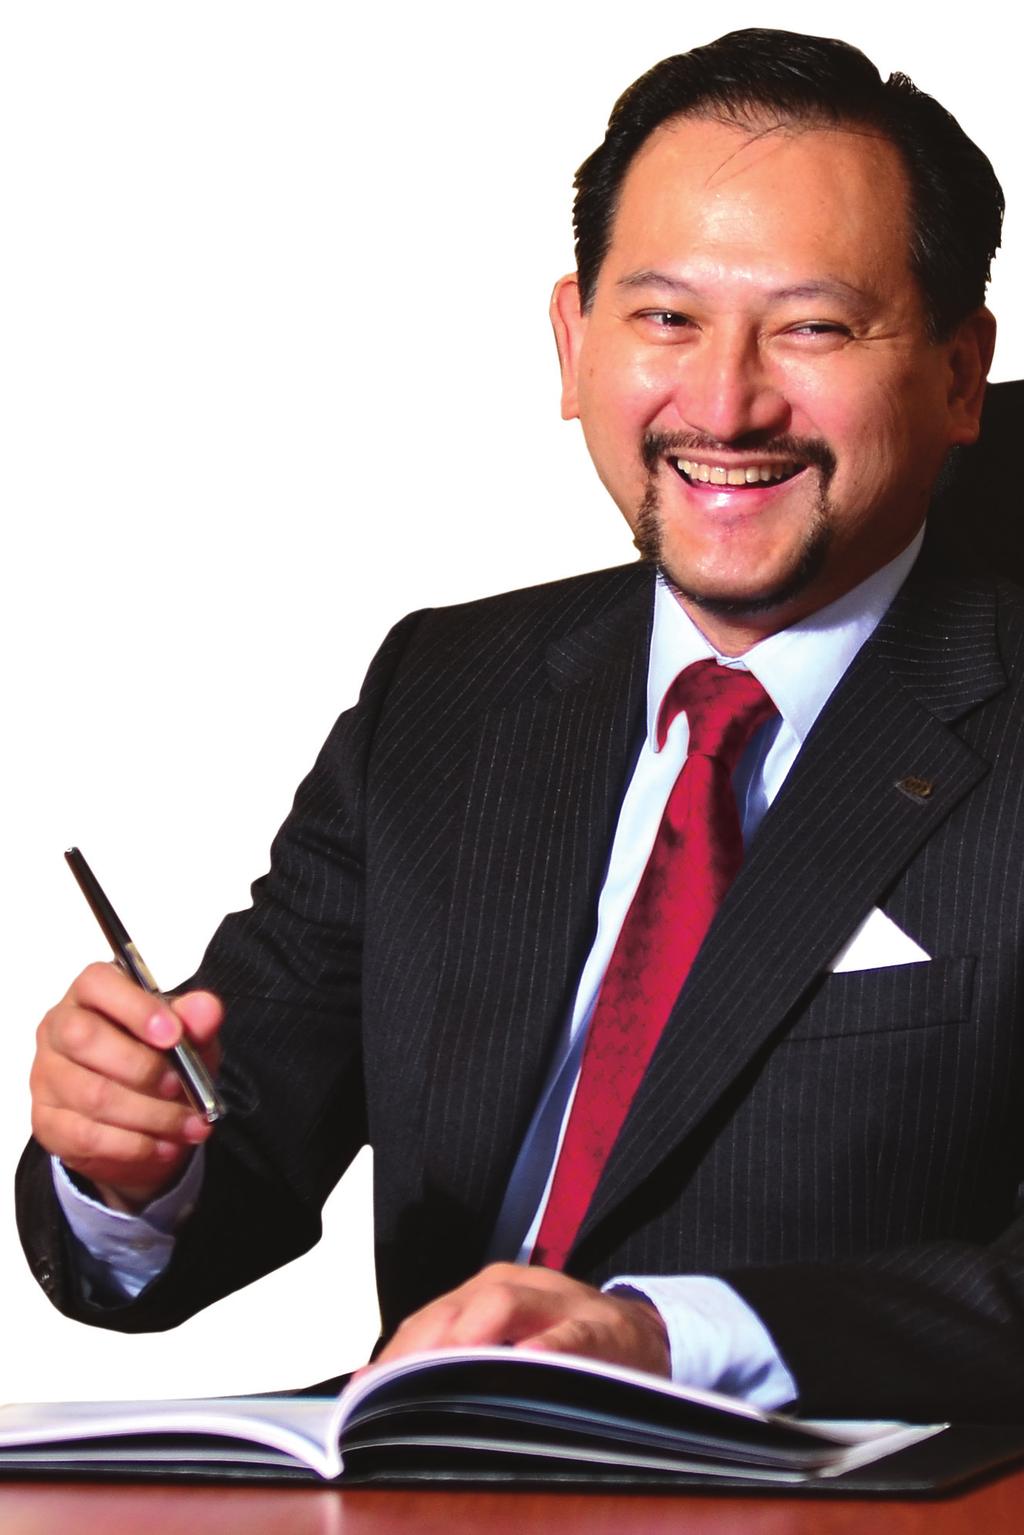 4 Tunku Dato Ya acob bin Tunku Tan Sri Abdullah has been a Director since its inception in November 1998. He was appointed as the Group Managing Director/Chief Executive Officer in 1999.